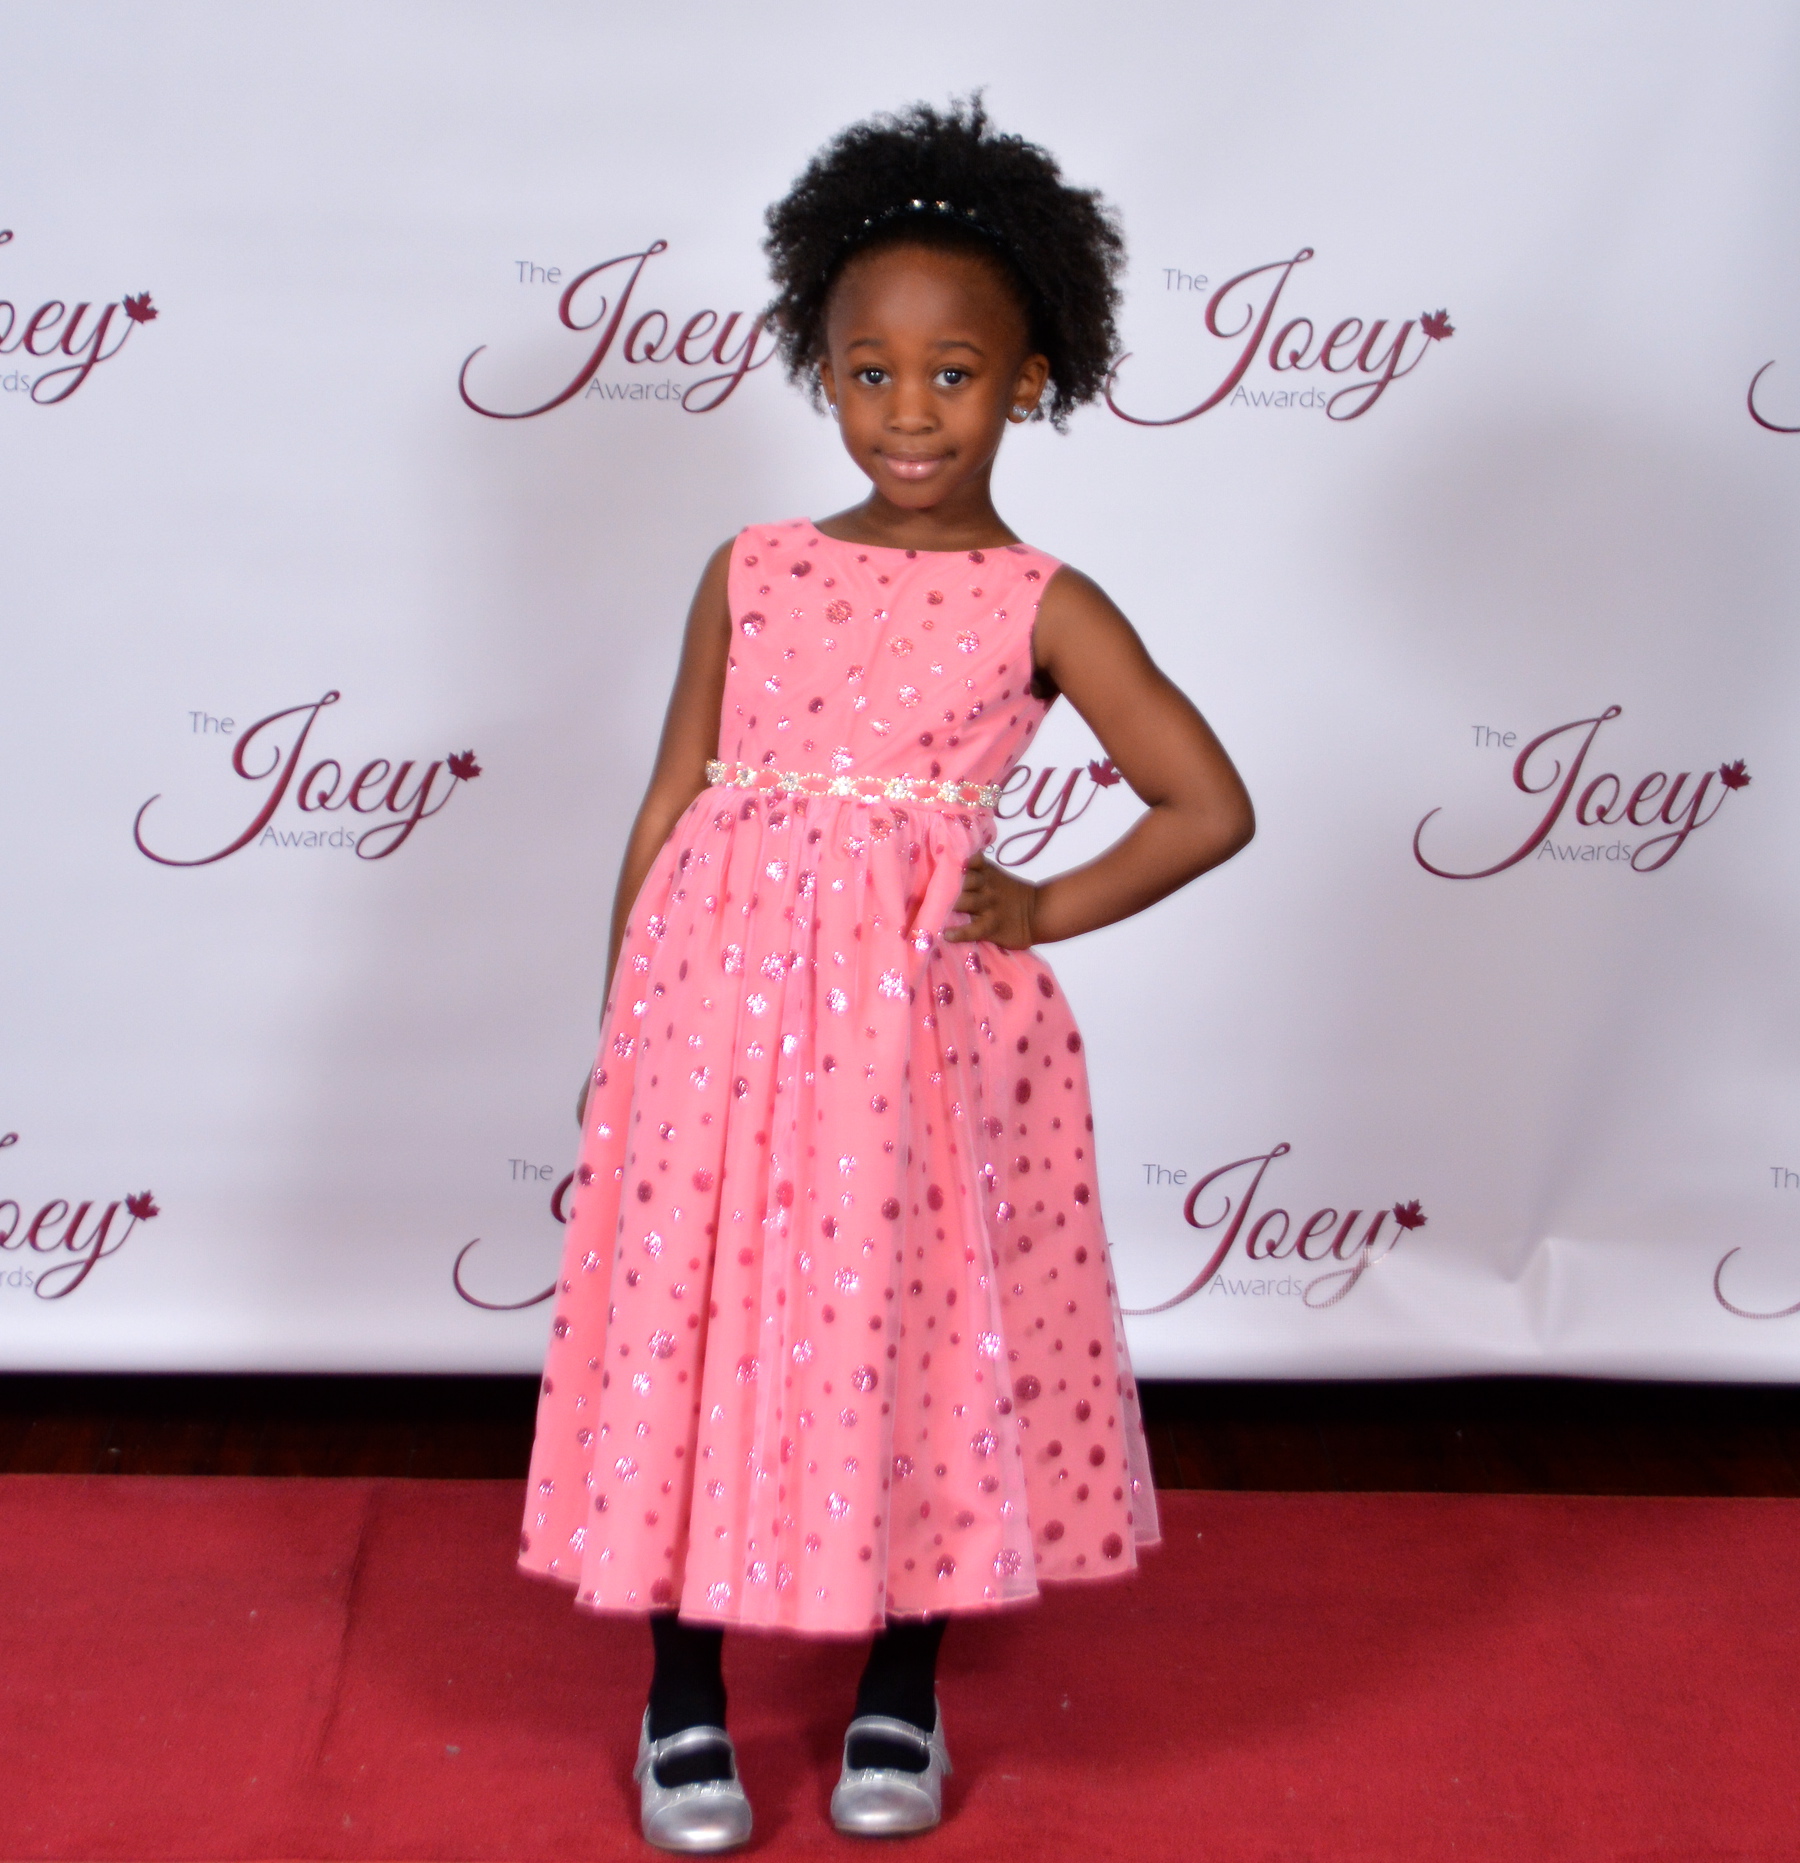 Ava at the 2014 Joey Awards in Vancouver